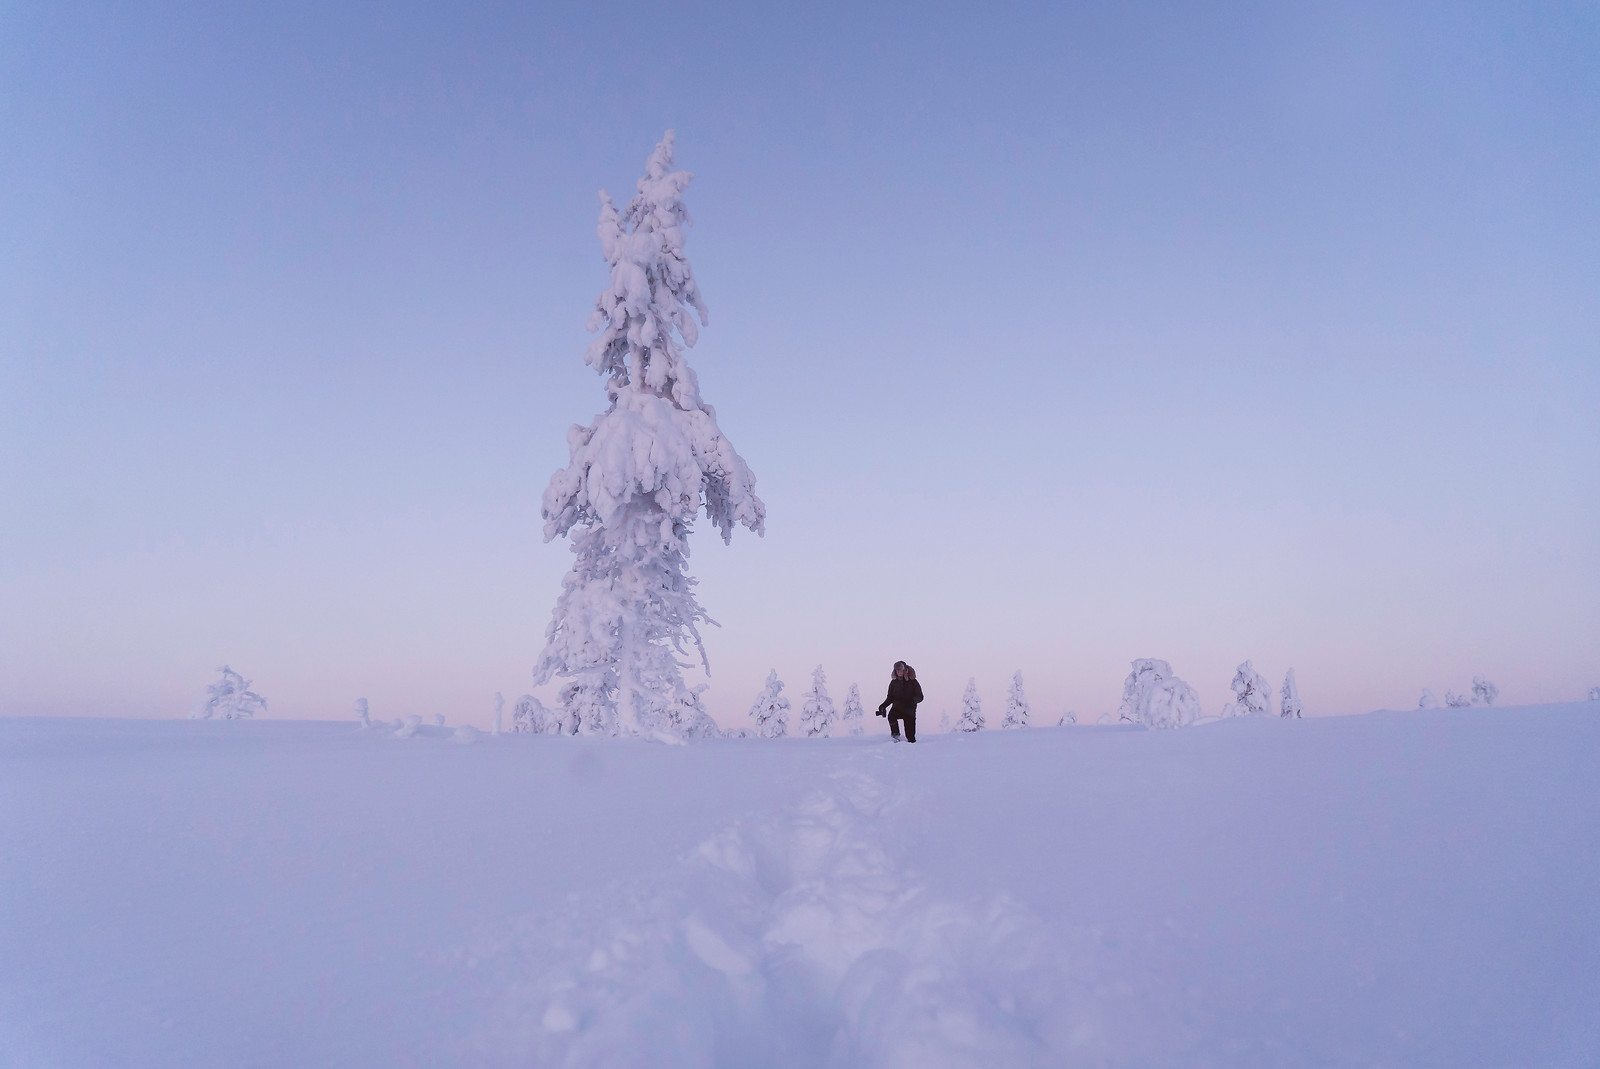 A person hikes through the snowy trees in Lapland, Finland during winter